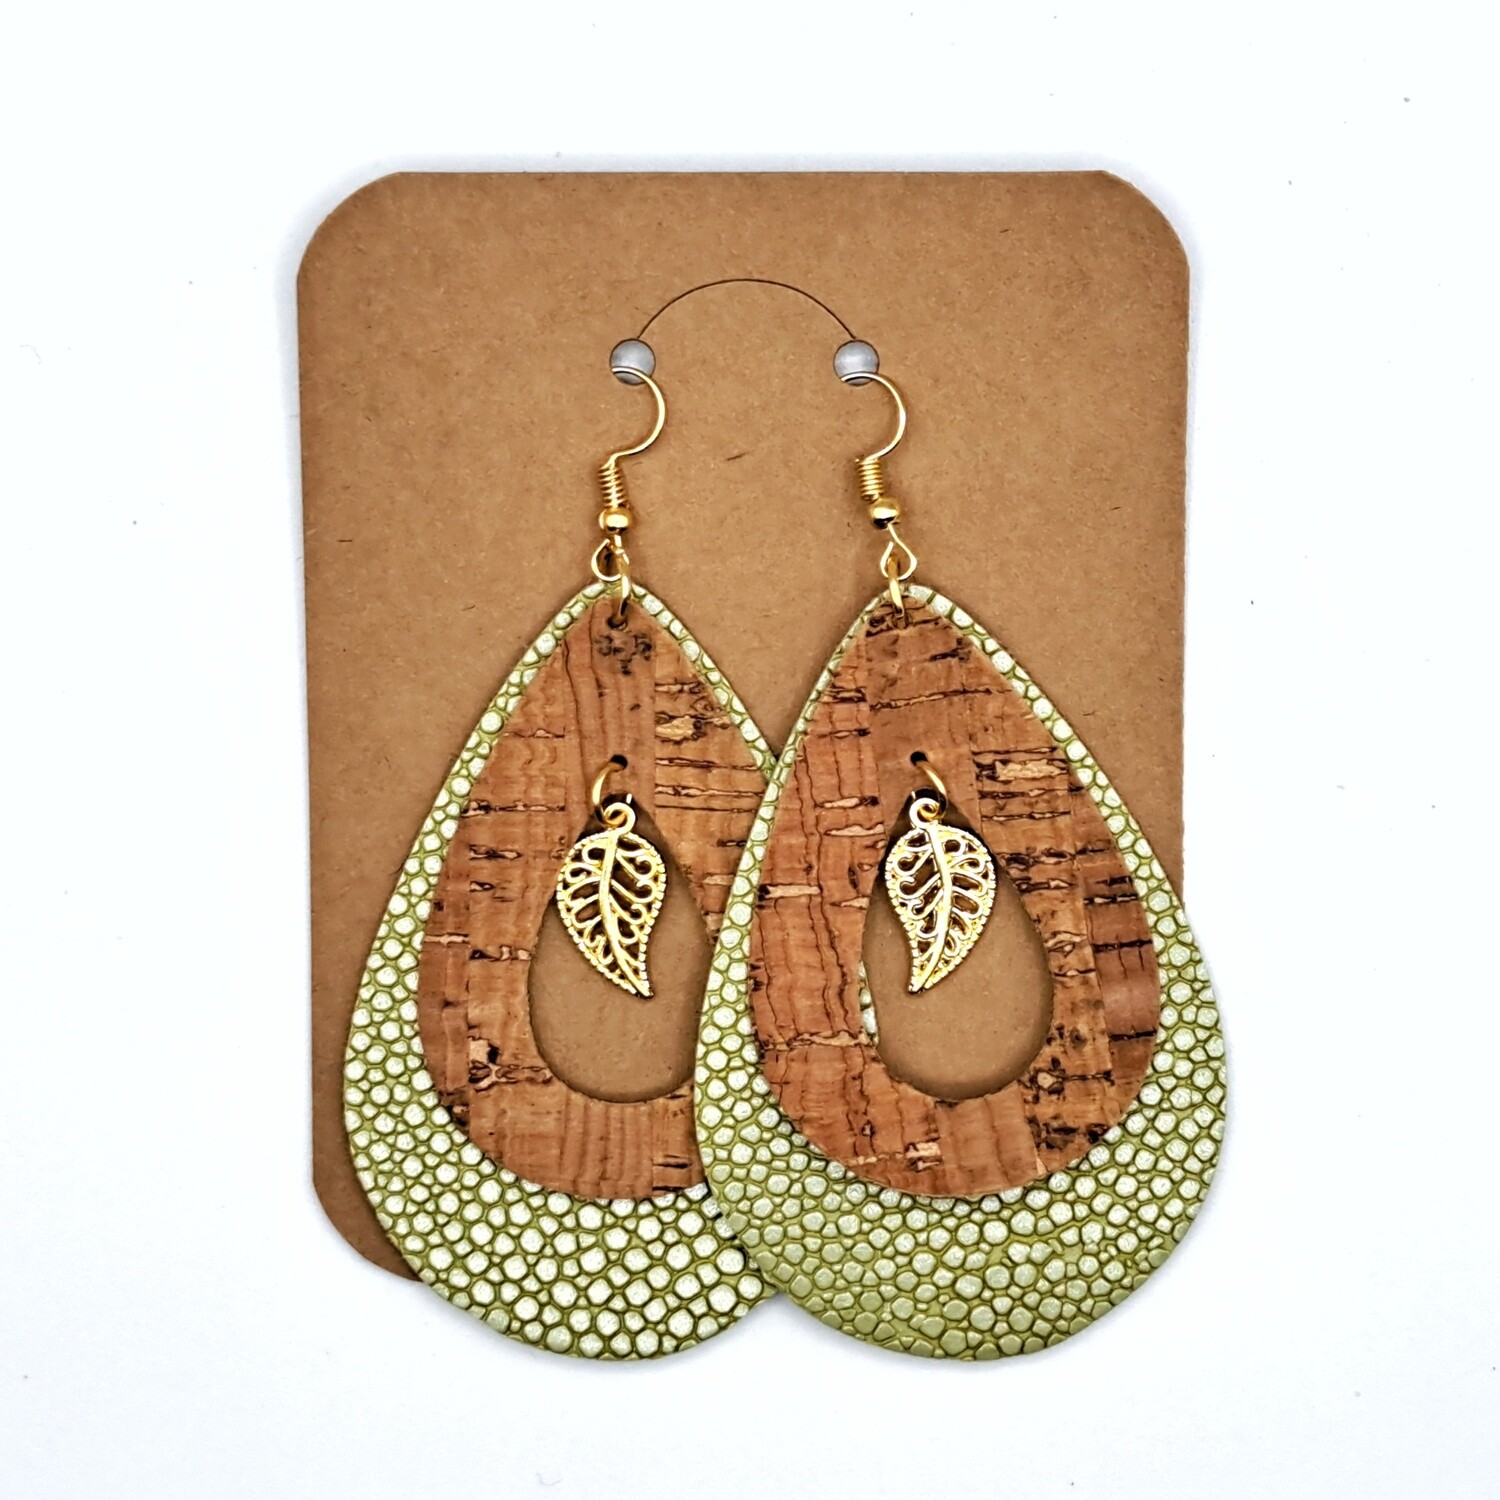 Handmade Layered Hoops Brown Cork/Green Faux Leather with Gold Leaf Charms